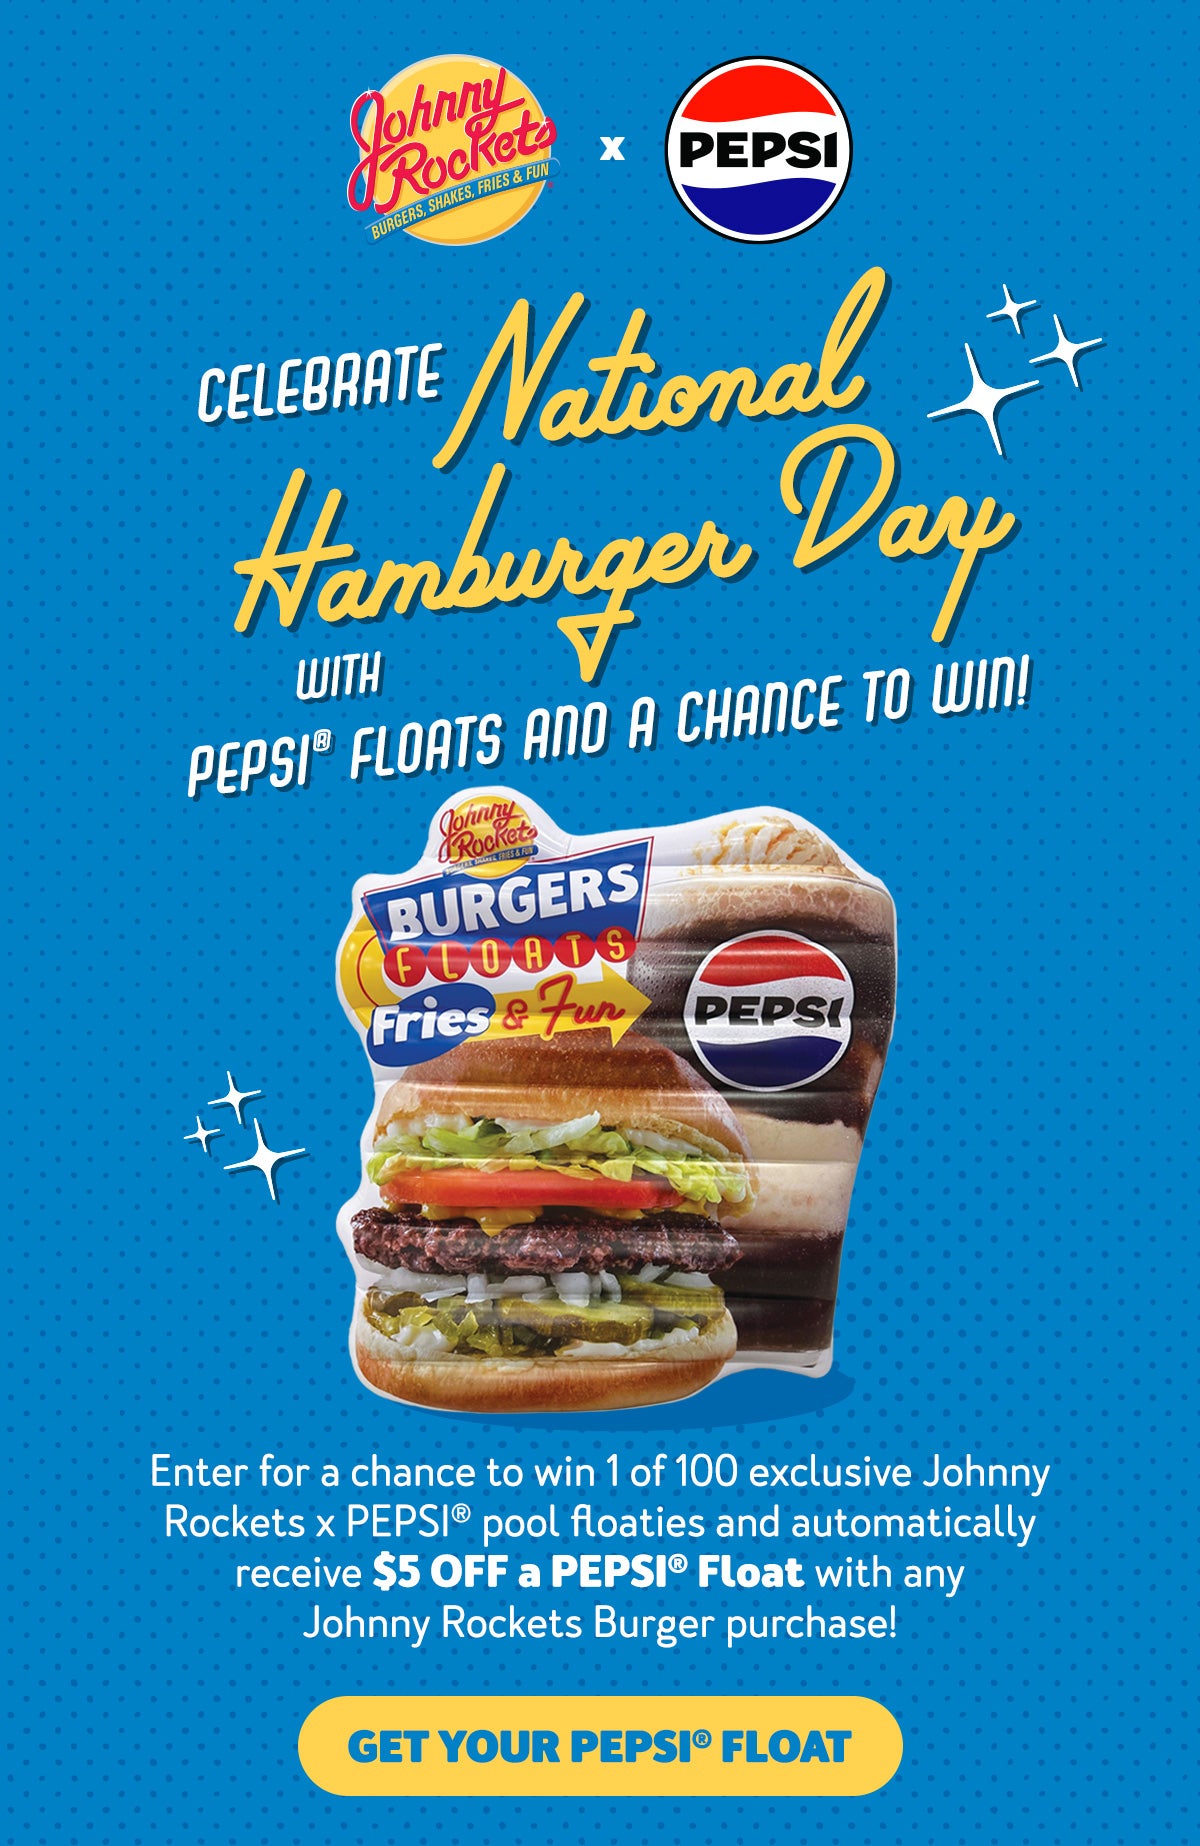 Celebrate National Hamburger Day with PEPSI(R) Floats and a chance to win! Enter for a chance to win 1 of 100 exclusive Johnny Rockets x PEPSI(R) pool floaties and automatically receive $5 off a PEPSI(R) Float with any Johnny Rockets Burger Purchase! Get your PEPSI(R) Float.